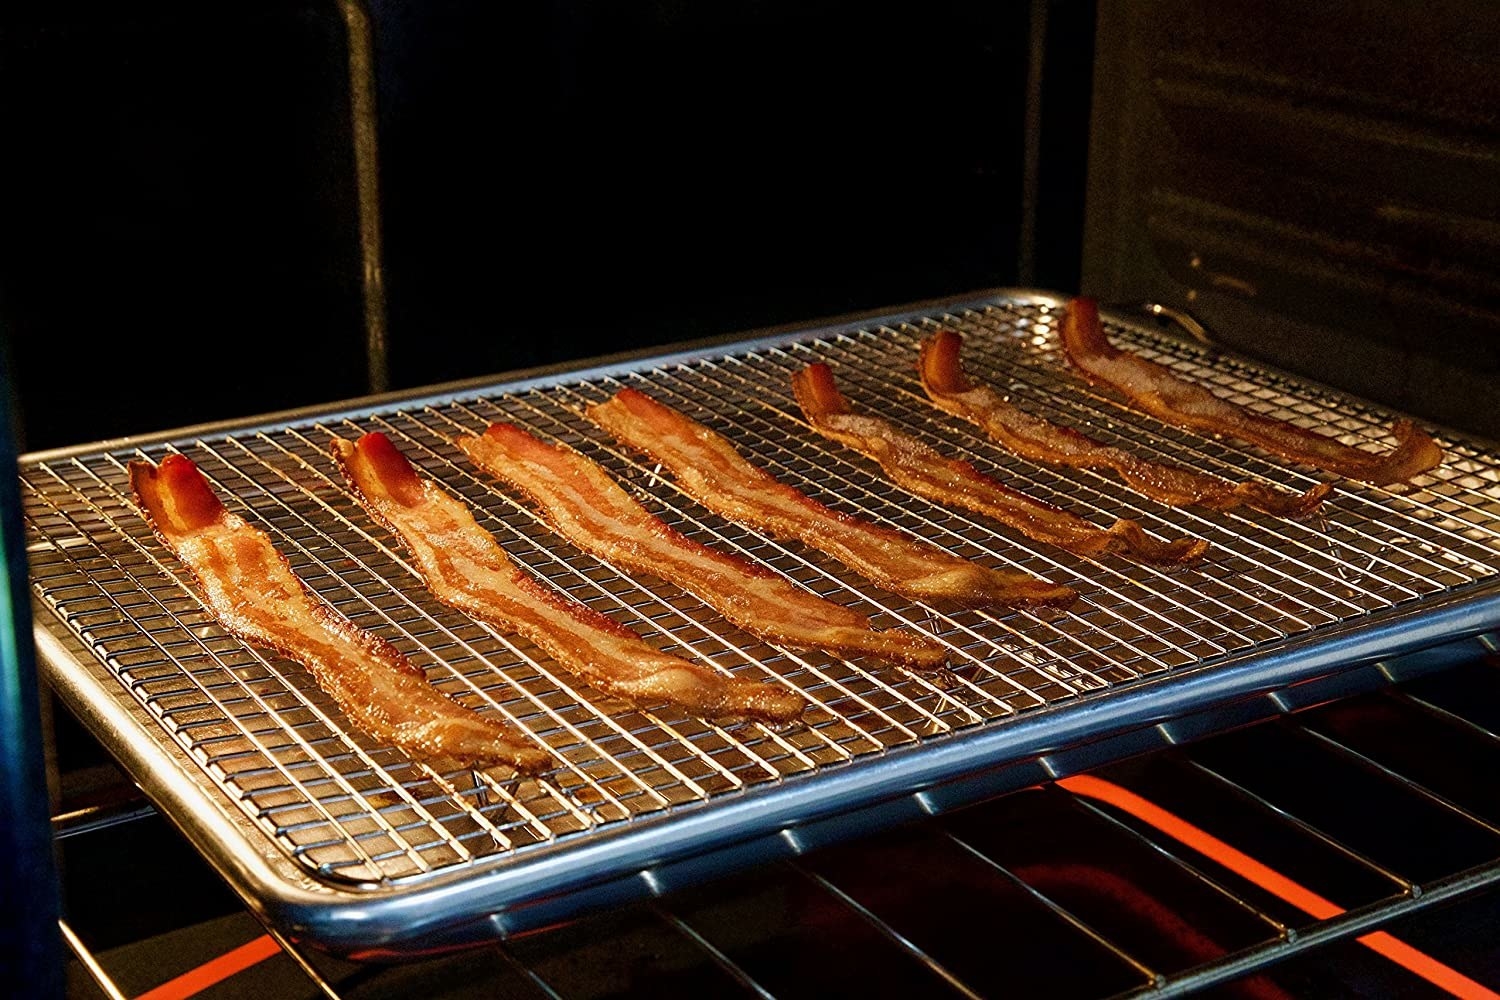 bacon on the pan in the oven